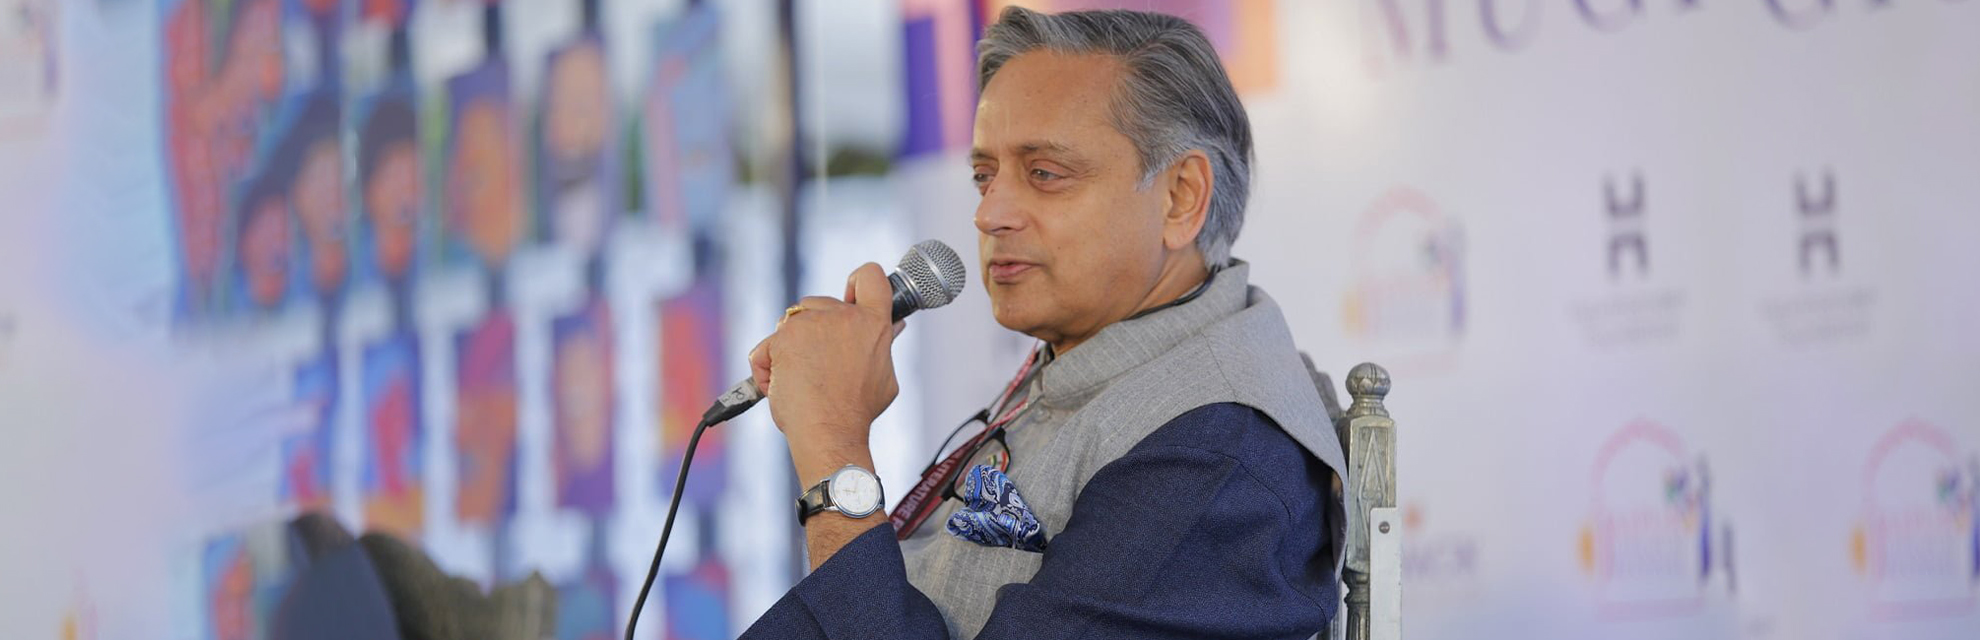 The Paradoxes of India with Shashi Tharoor